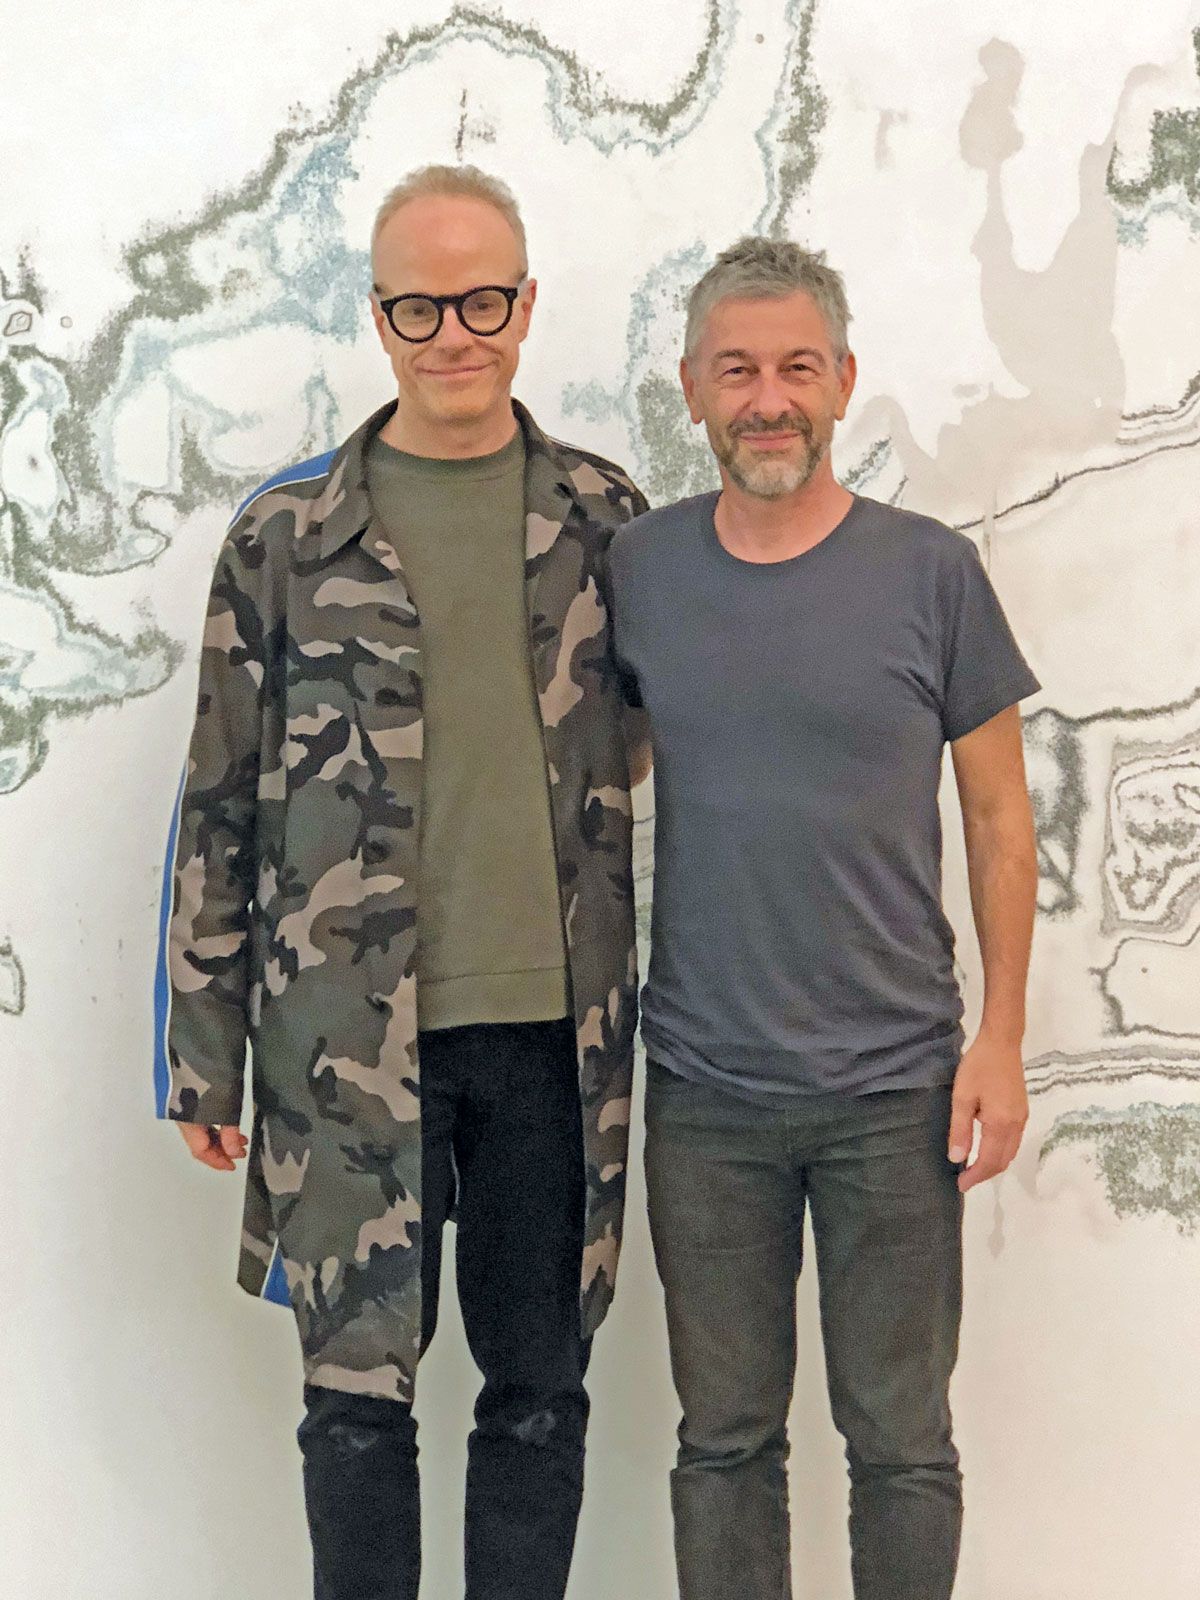 Pierre Huyghe's (right) exhibition at the Serpentine Gallery's, where Hans Ulrich Obrist (left) is artistic director, opens this week Courtesy of the Serpentine Galleries